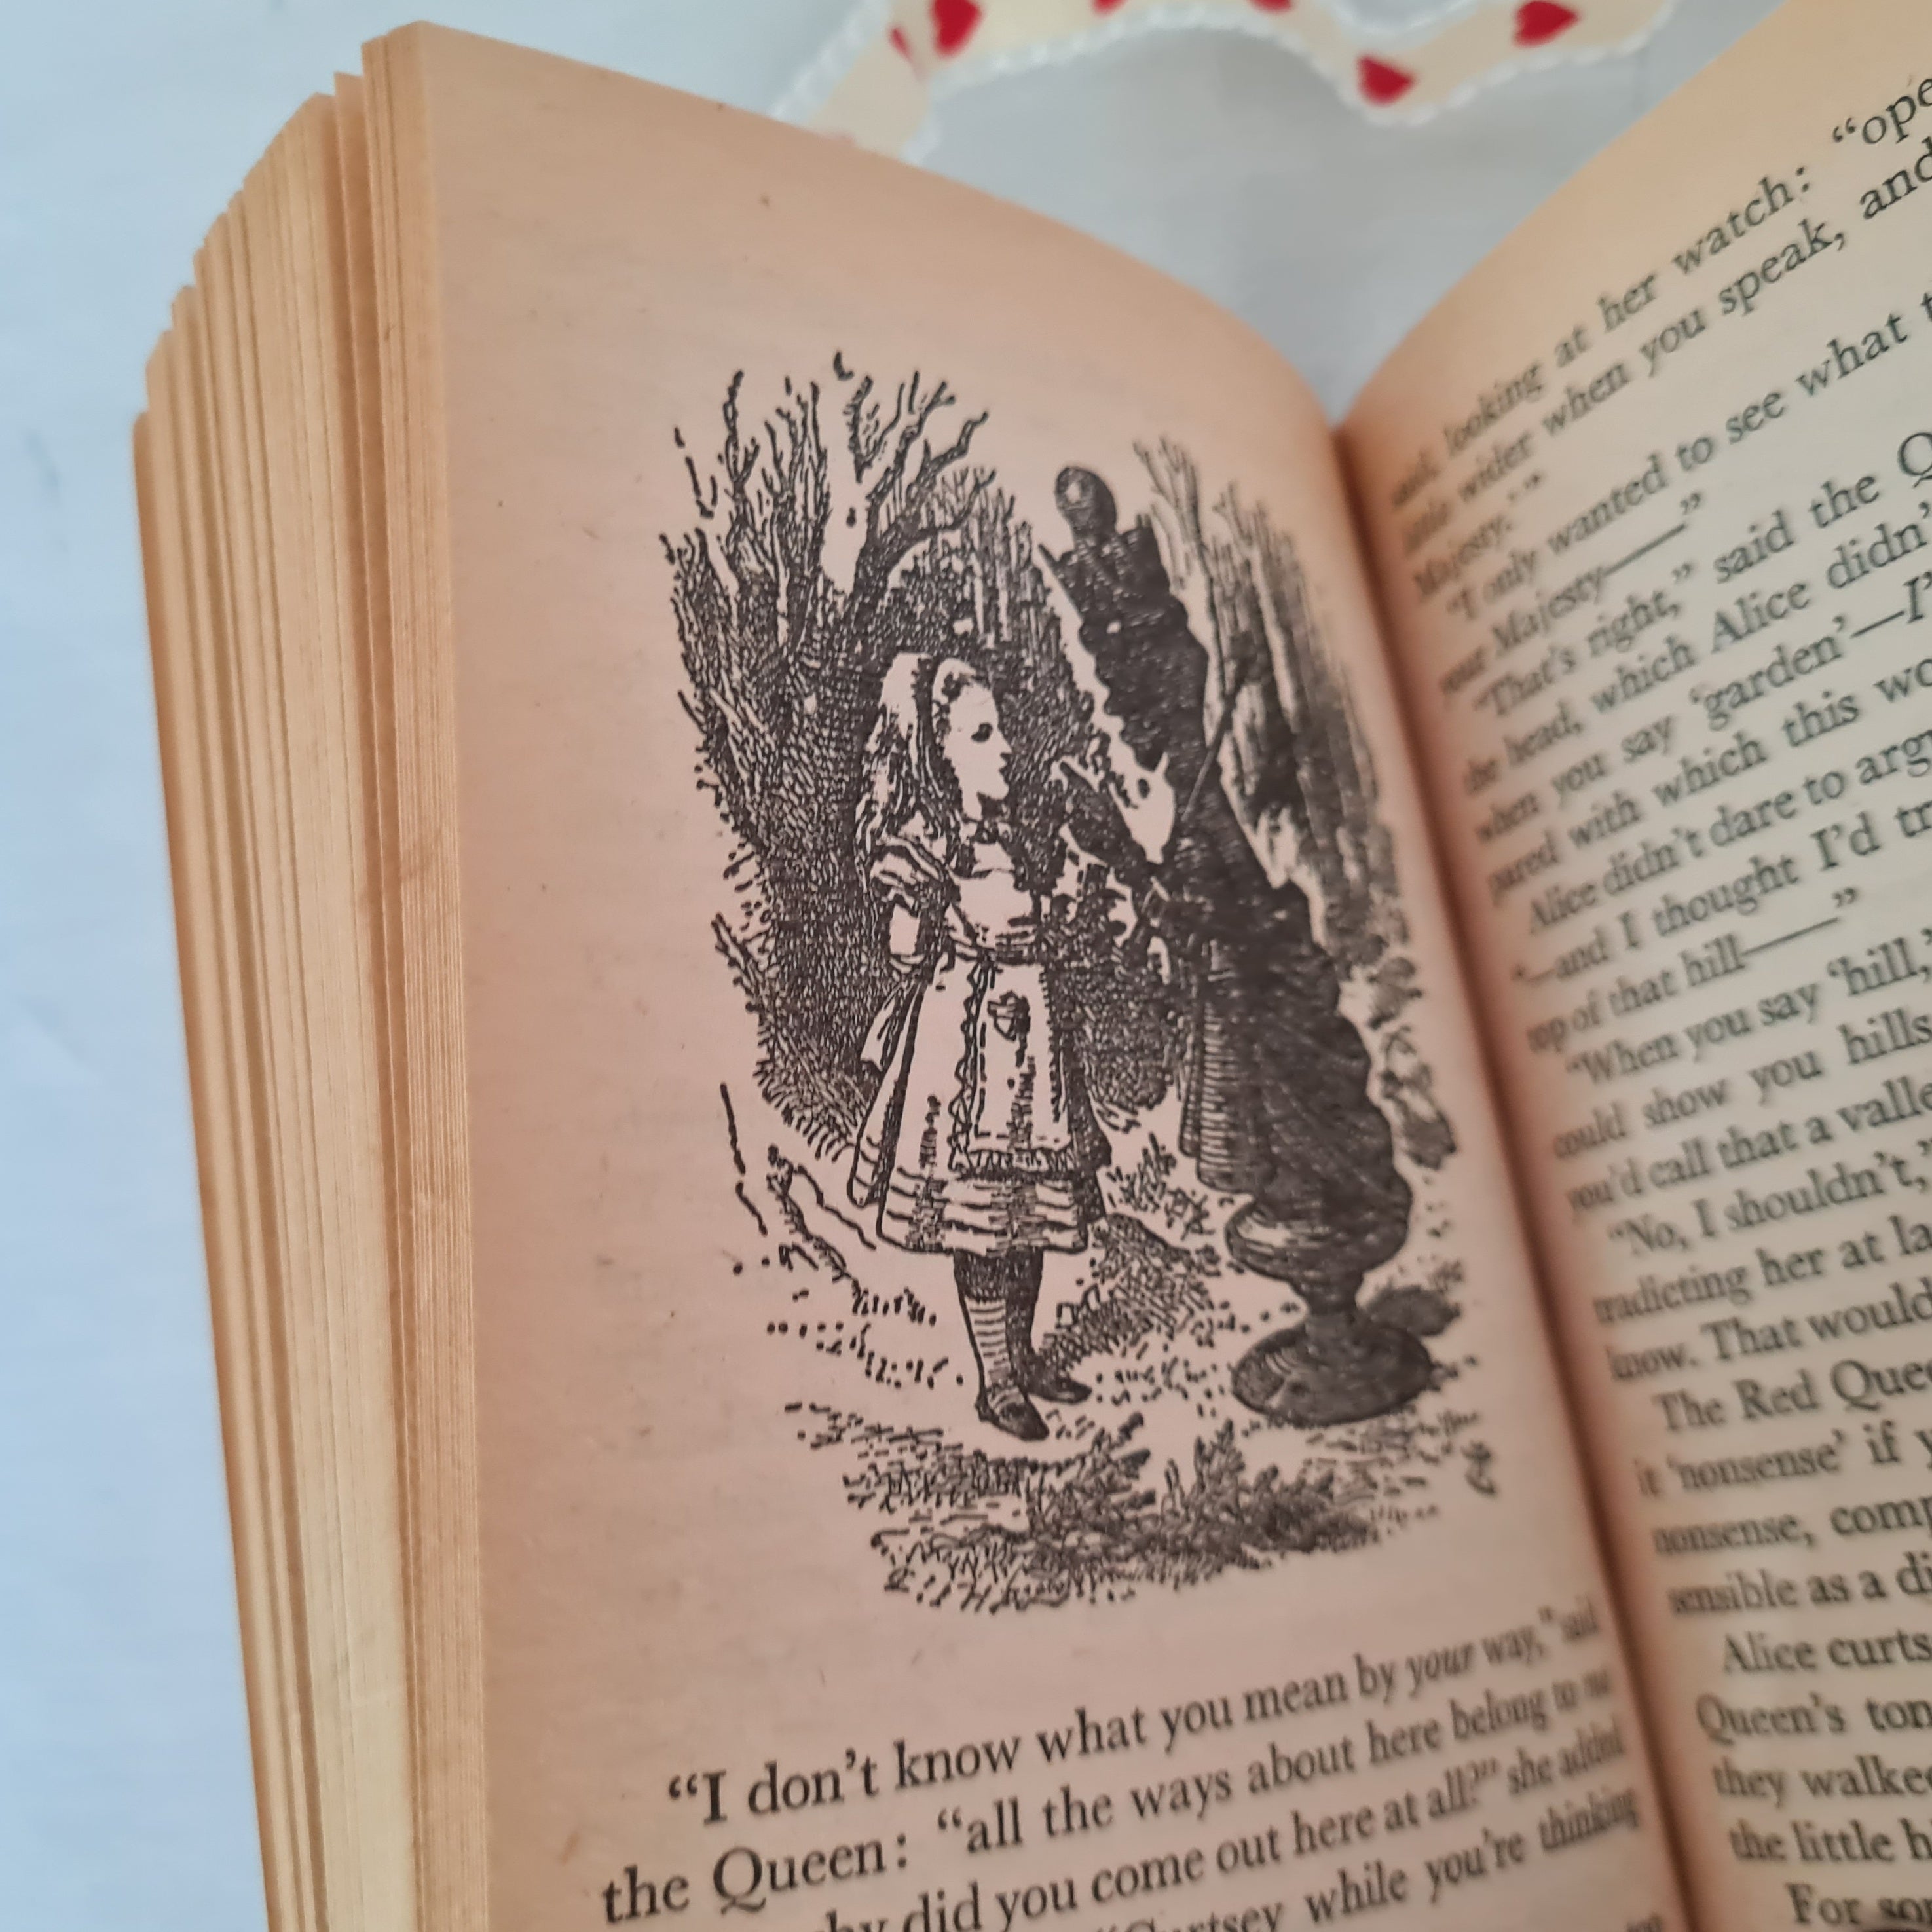 the　Bookshop　Adventures　Through　in　Delights　by　of　Bumper　Wonderland　Looking-Glass　Box　L　–　1968　Alice's